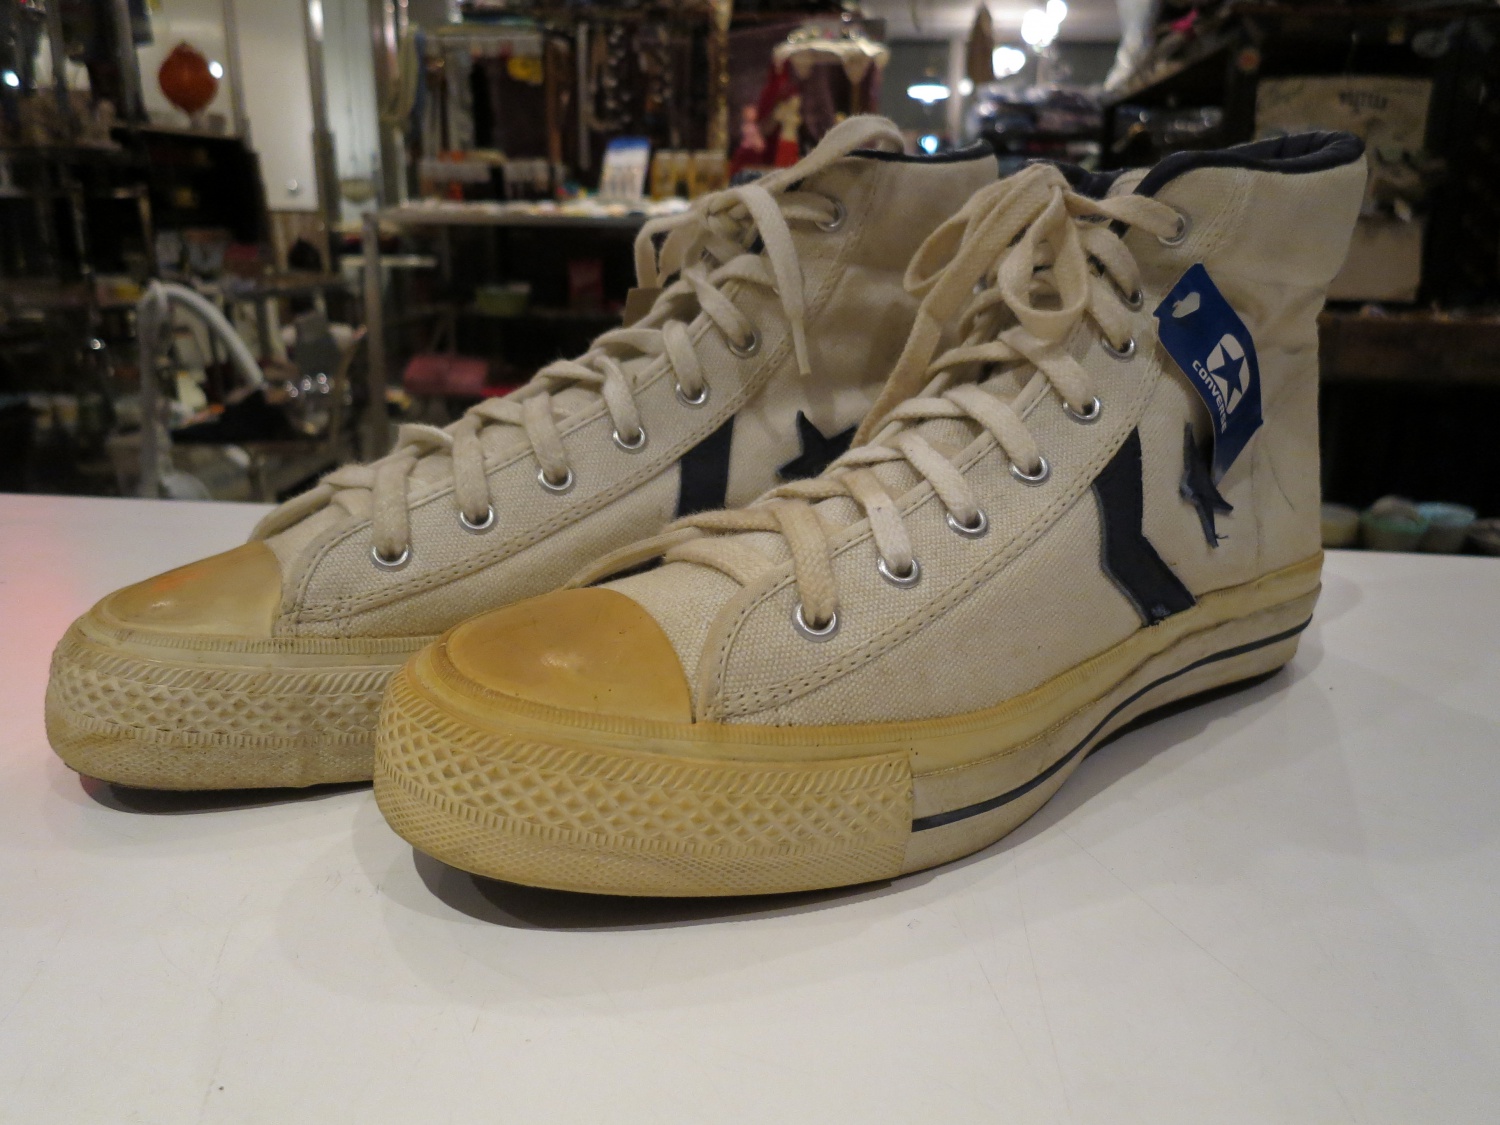 DEAD STOCK CONVERSE Pro-Star Hi vintage used clothing ROGER'S